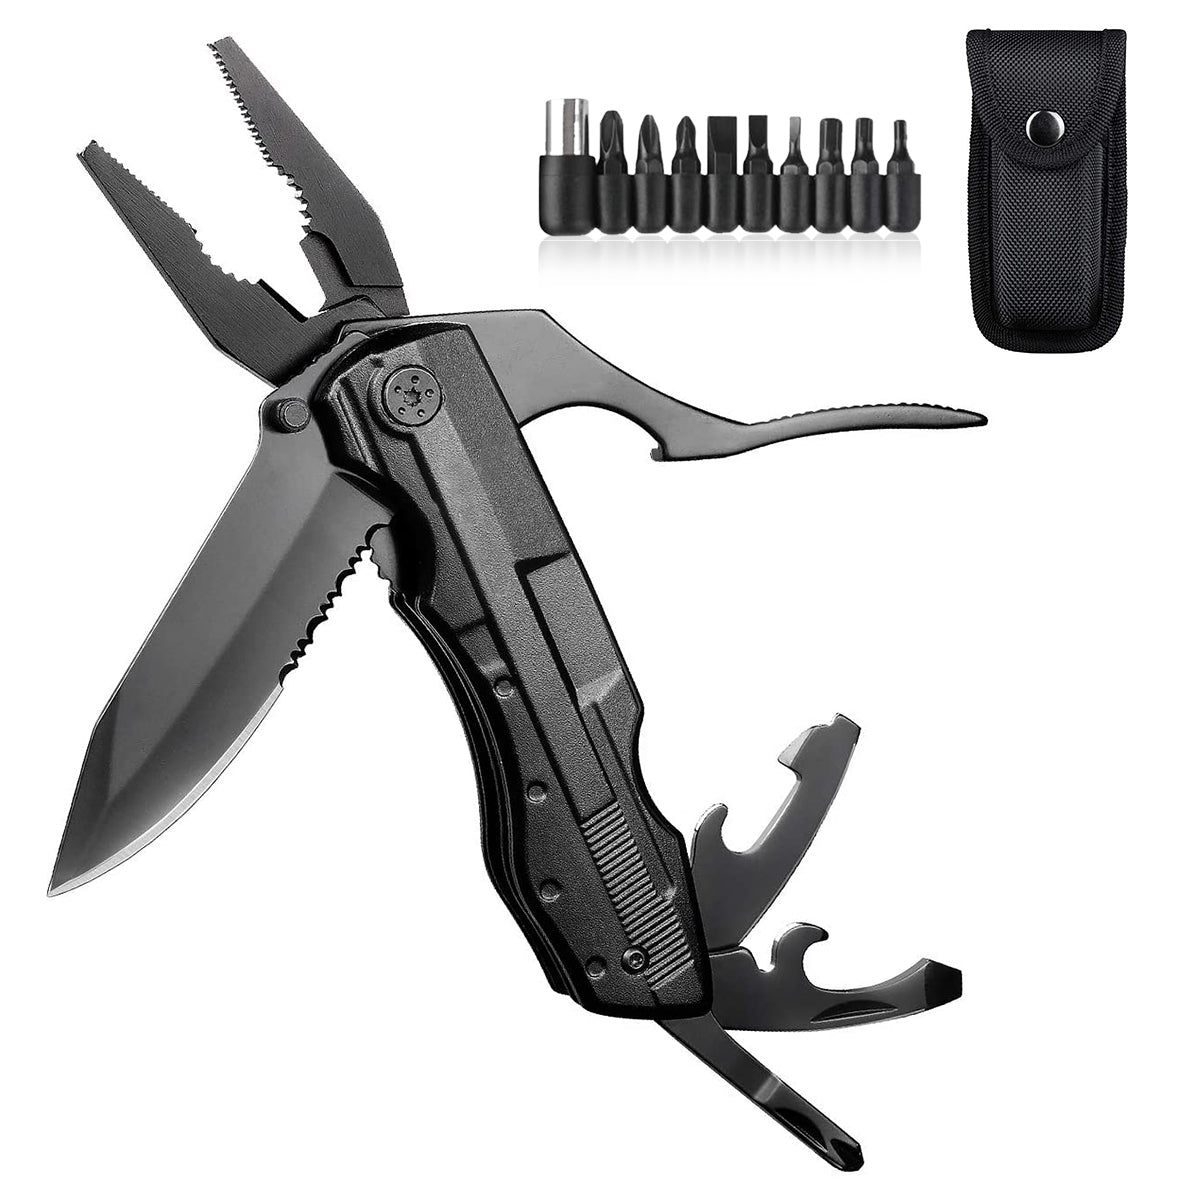 ProberosFoldable Multi Tools Kit Plier with Nylon Pouch for Great Men's Camping, Cycling , DIY Activities 9 in 1